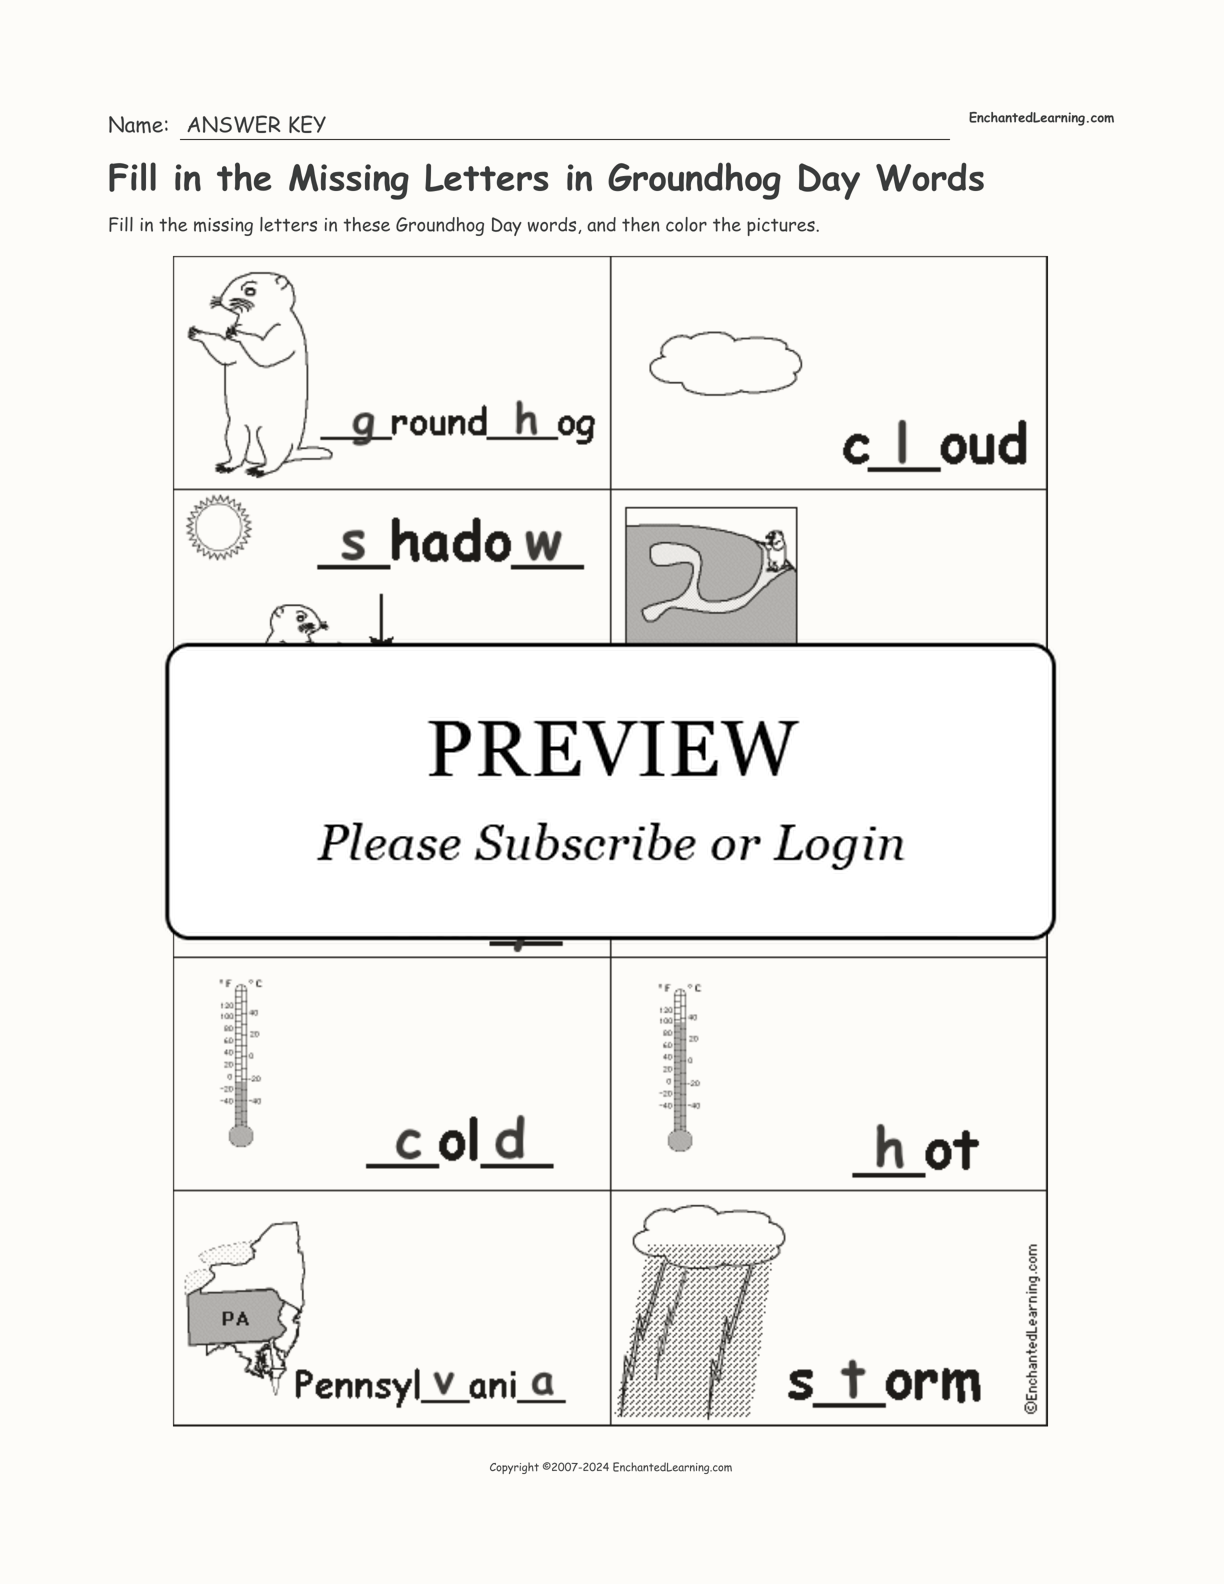 Fill in the Missing Letters in Groundhog Day Words interactive worksheet page 2